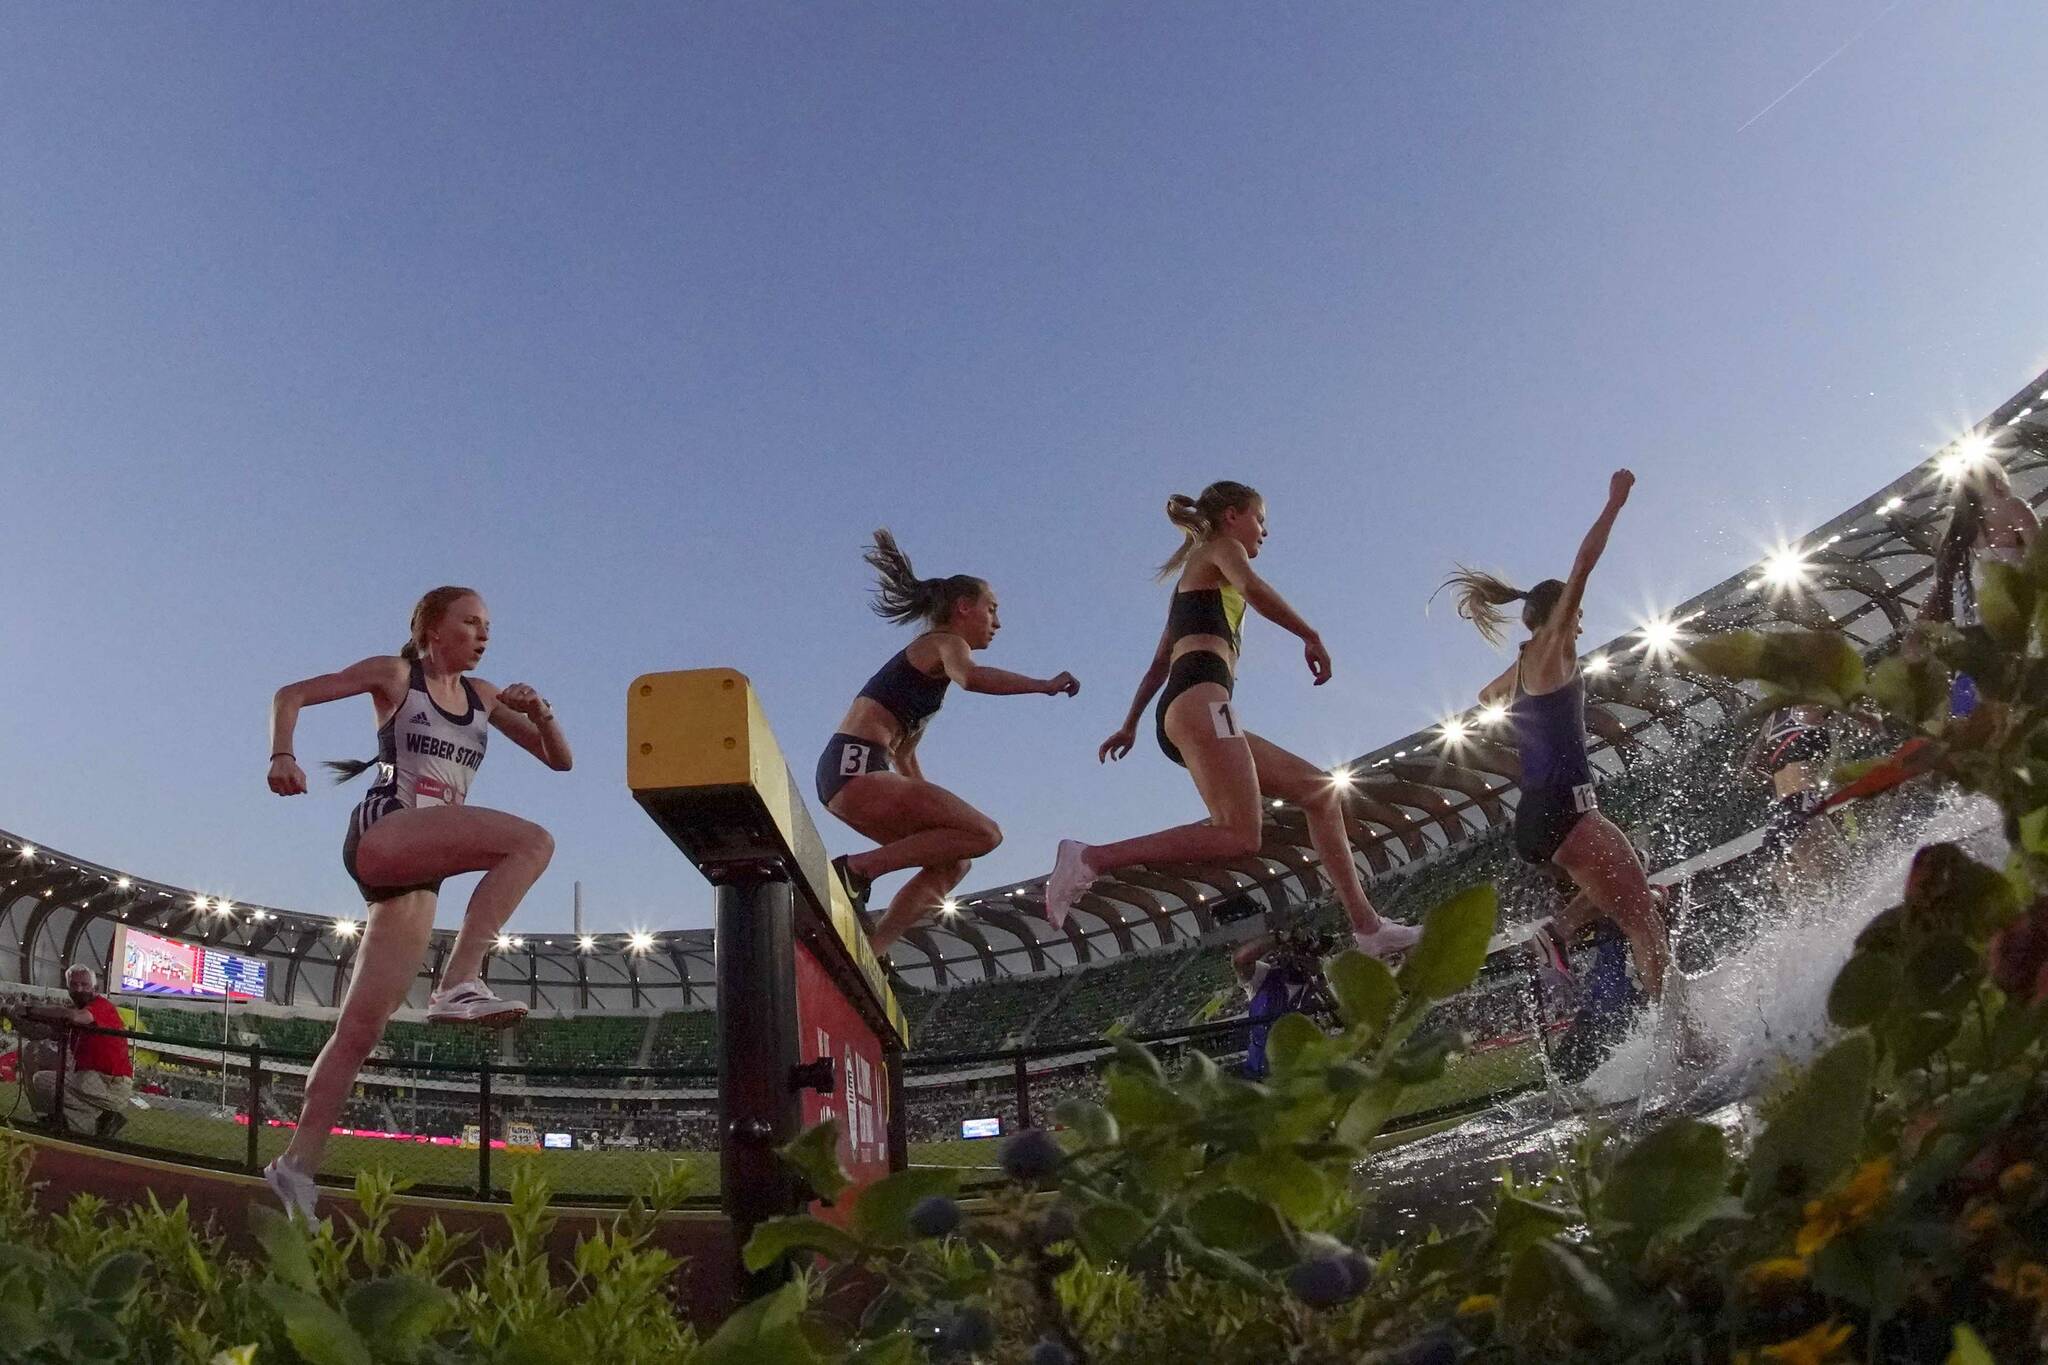 Allie Ostrander, third from left, competes in the women’s 3000-meter steeplechase at the U.S. Olympic Track and Field Trials on Thursday, June 24, 2021, in Eugene, Oregon. (AP Photo/Charlie Riedel)